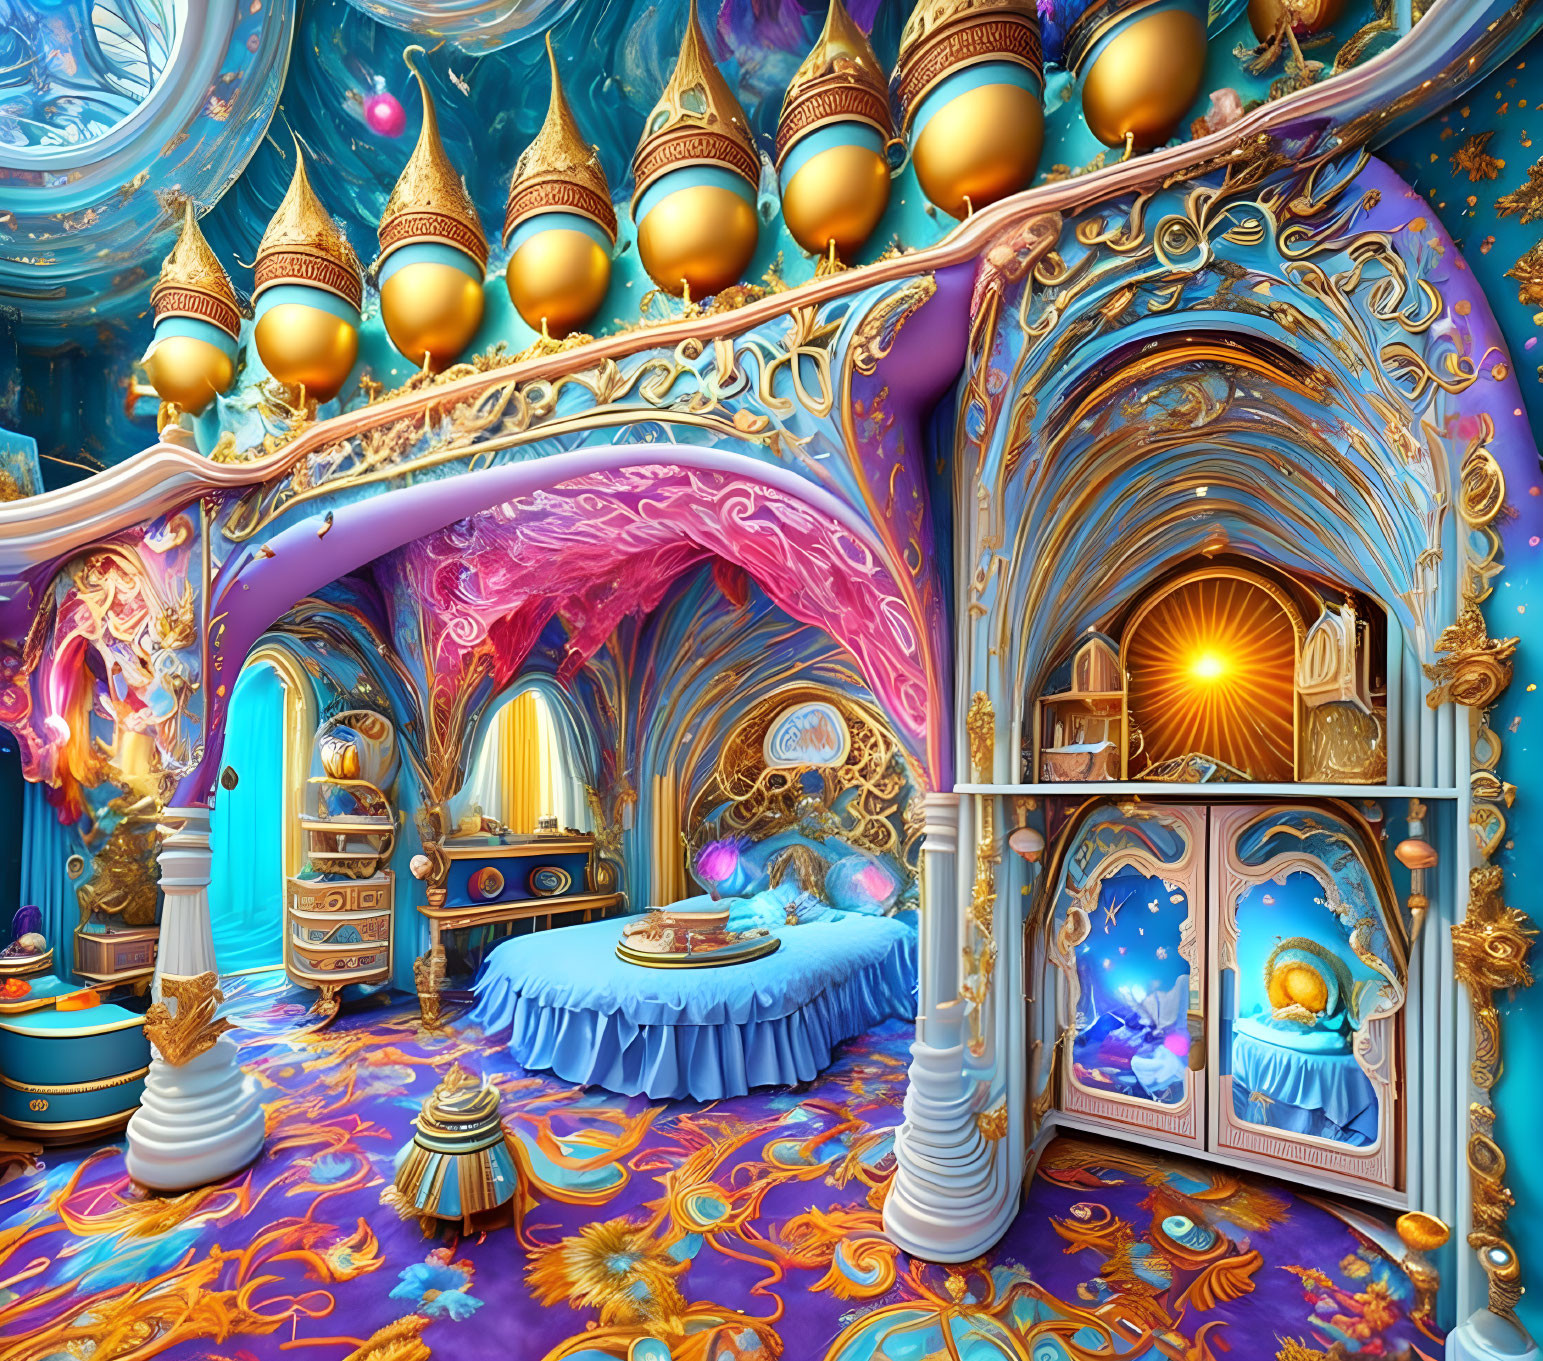 Fantastical room with golden domes, blue and pink architecture, whimsical furniture.